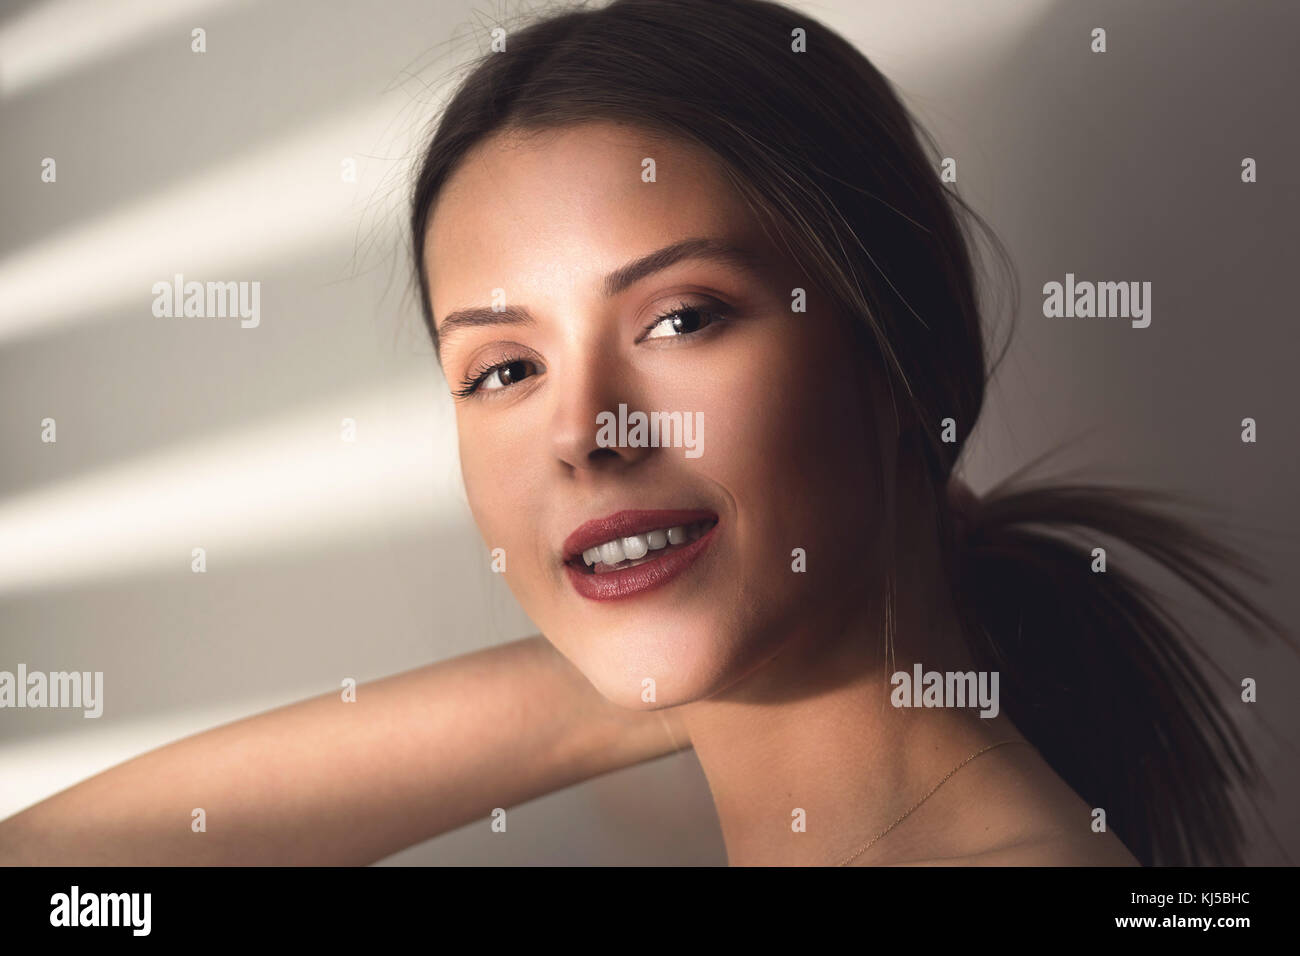 Beautiful young woman face close up portrait. Stock Photo